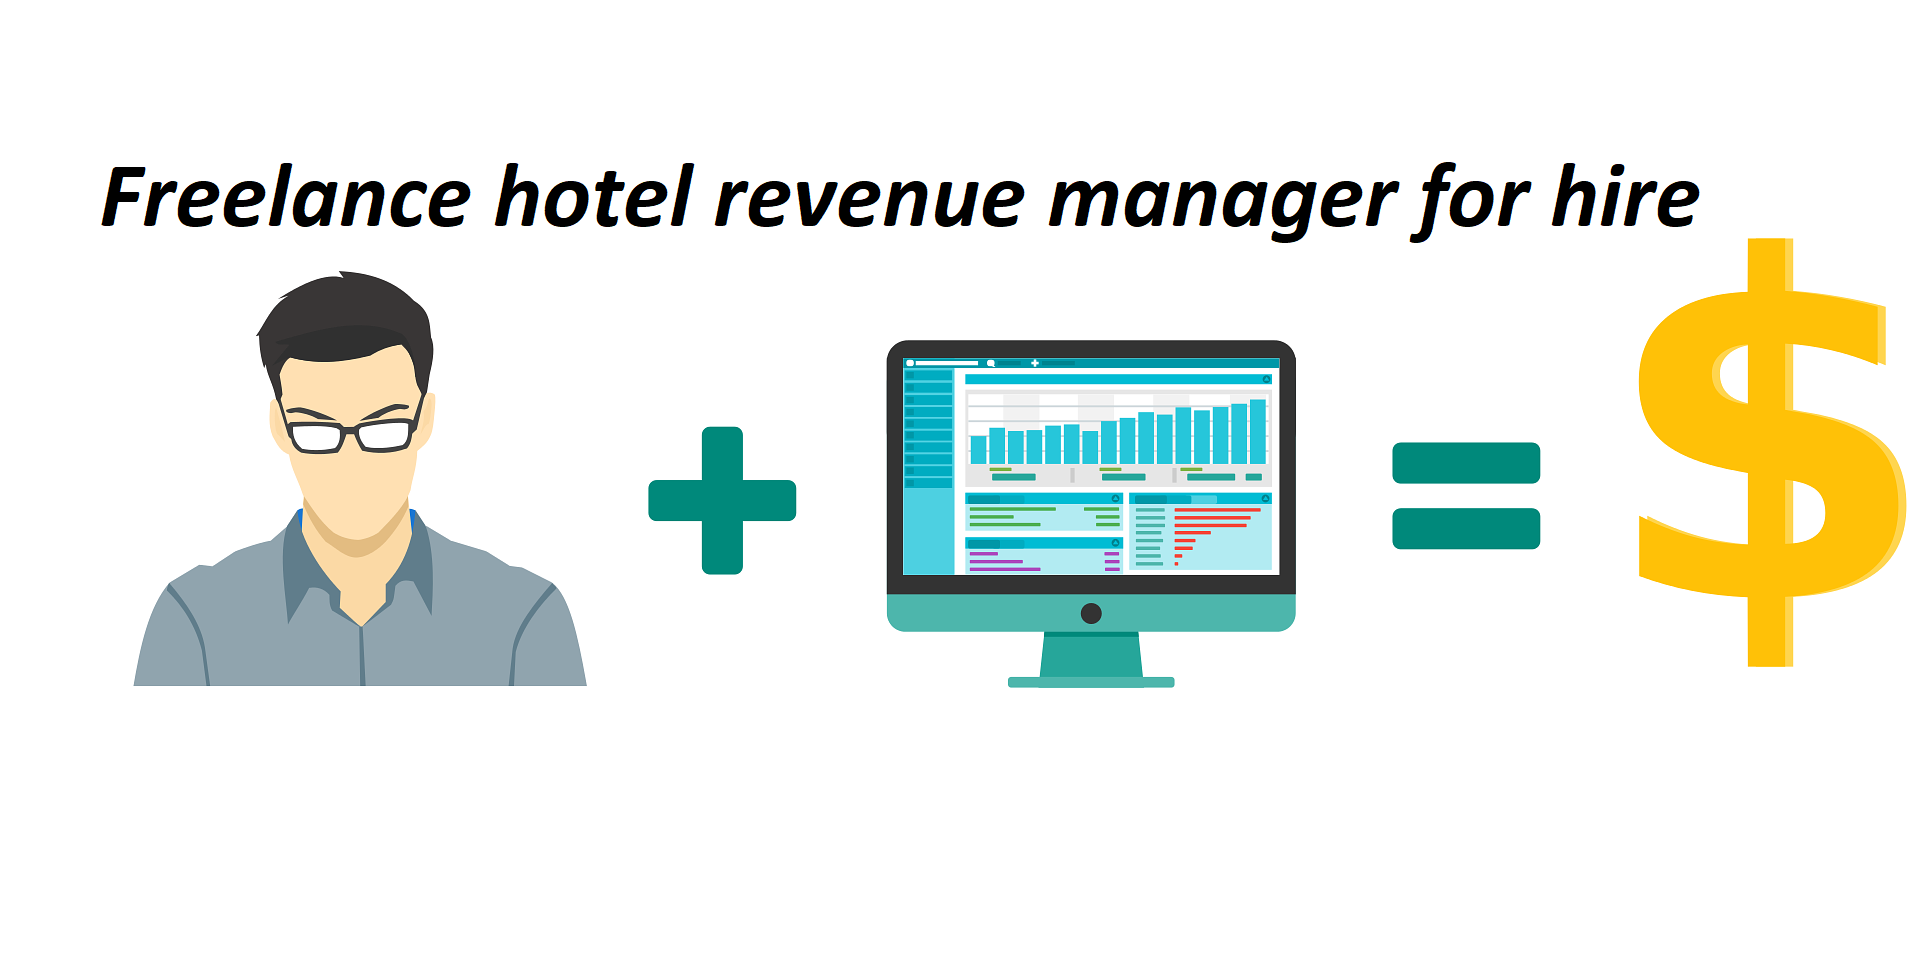 Freelance hotel revenue manager for hire